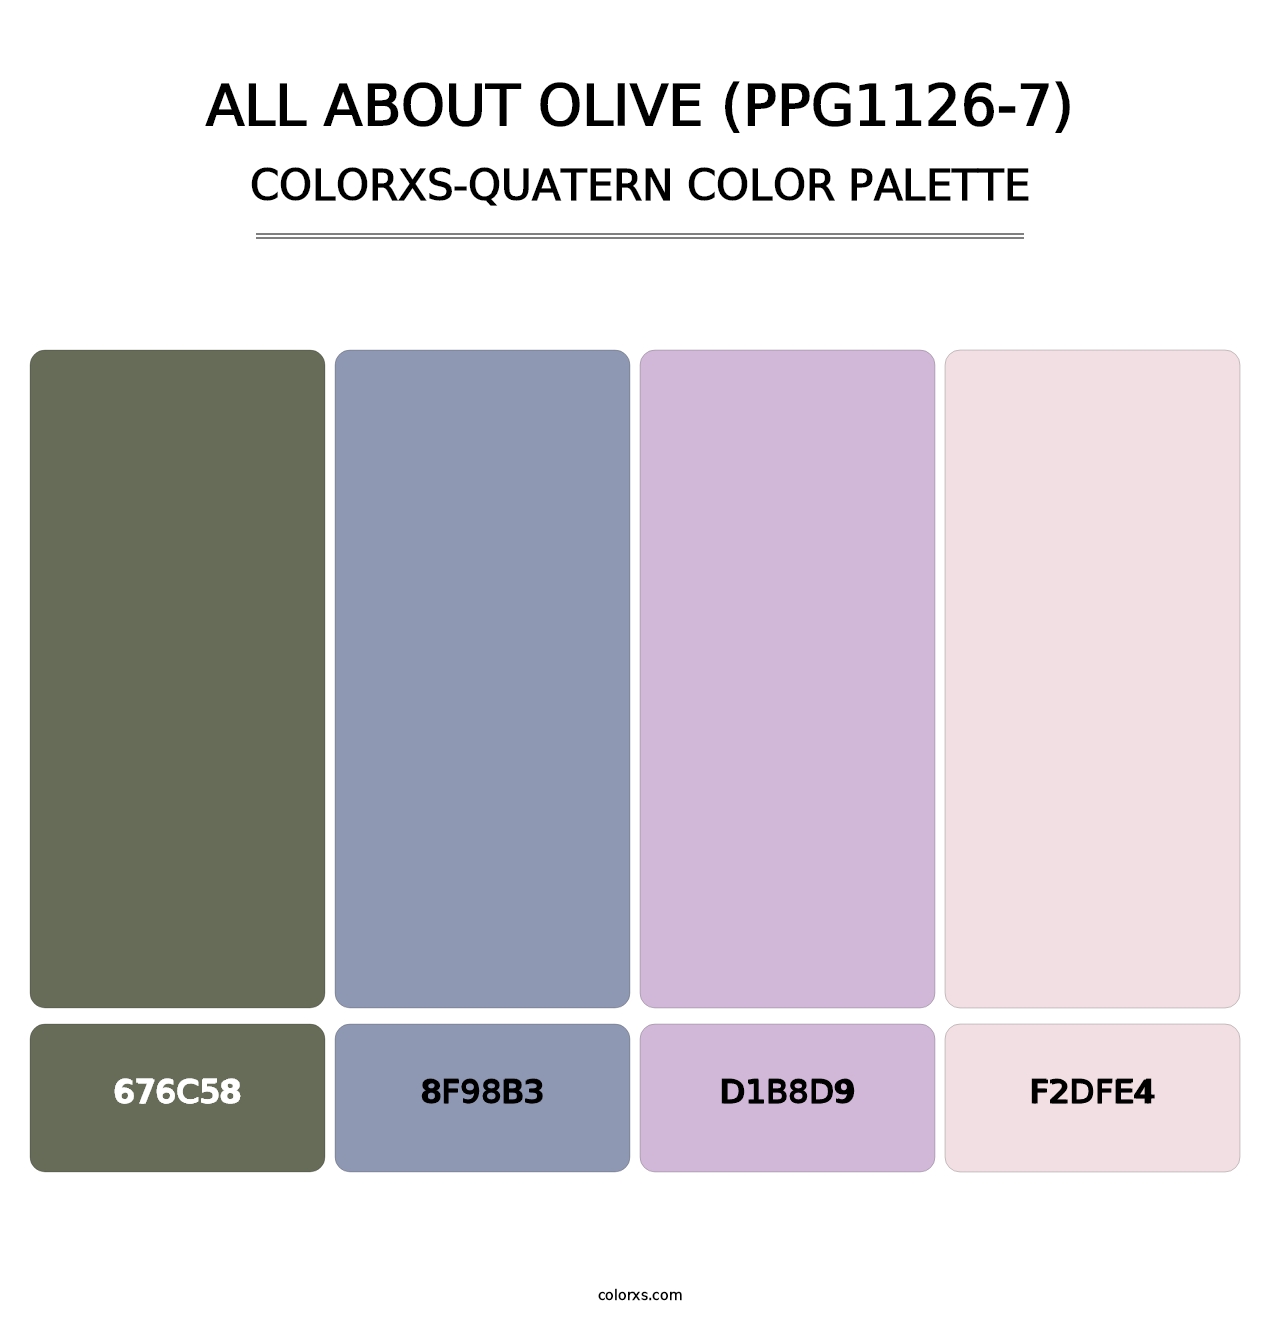 All About Olive (PPG1126-7) - Colorxs Quatern Palette